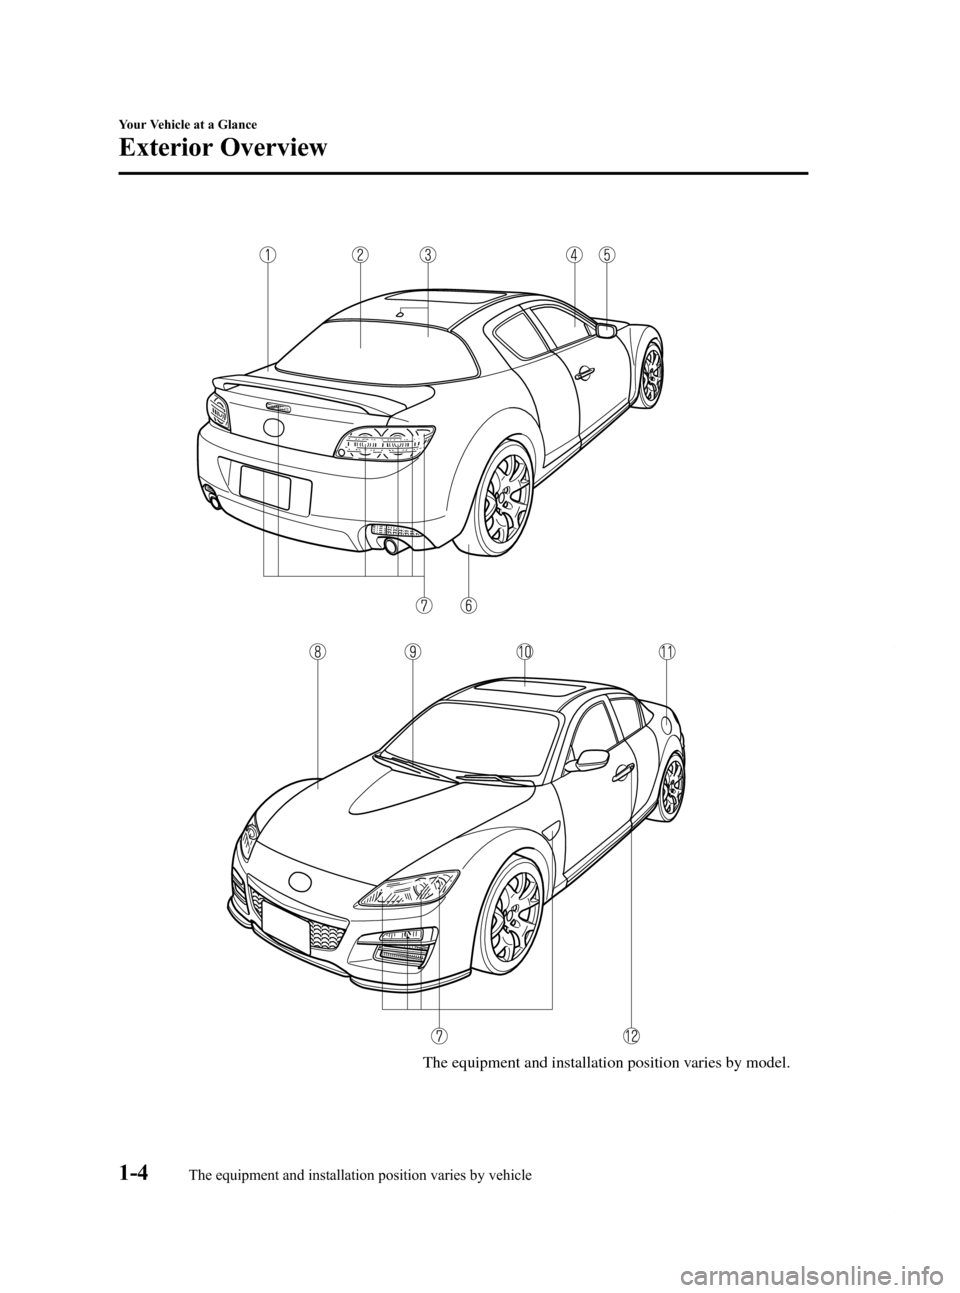 MAZDA MODEL RX 8 2009  Owners Manual (in English) Black plate (10,1)
The equipment and installation position varies by model.
1-4
Your Vehicle at a Glance
The equipment and installation position varies by vehicle
Exterior Overview
RX-8_8Z09-EA-08C_Ed